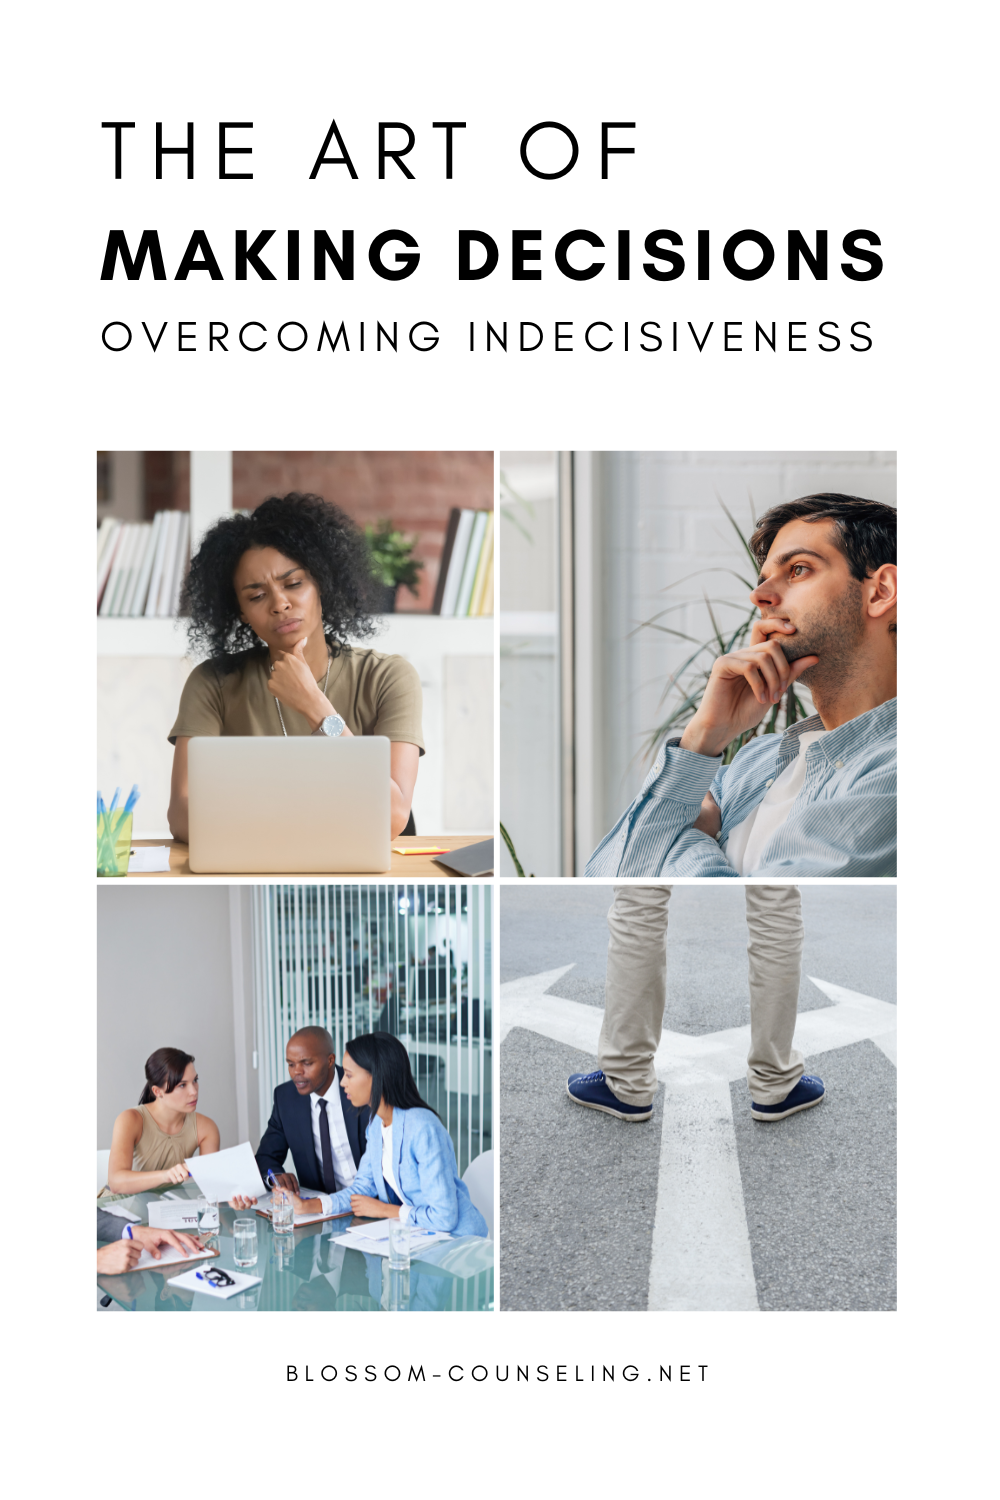 The Art of Making Decisions: Overcoming Indecisiveness